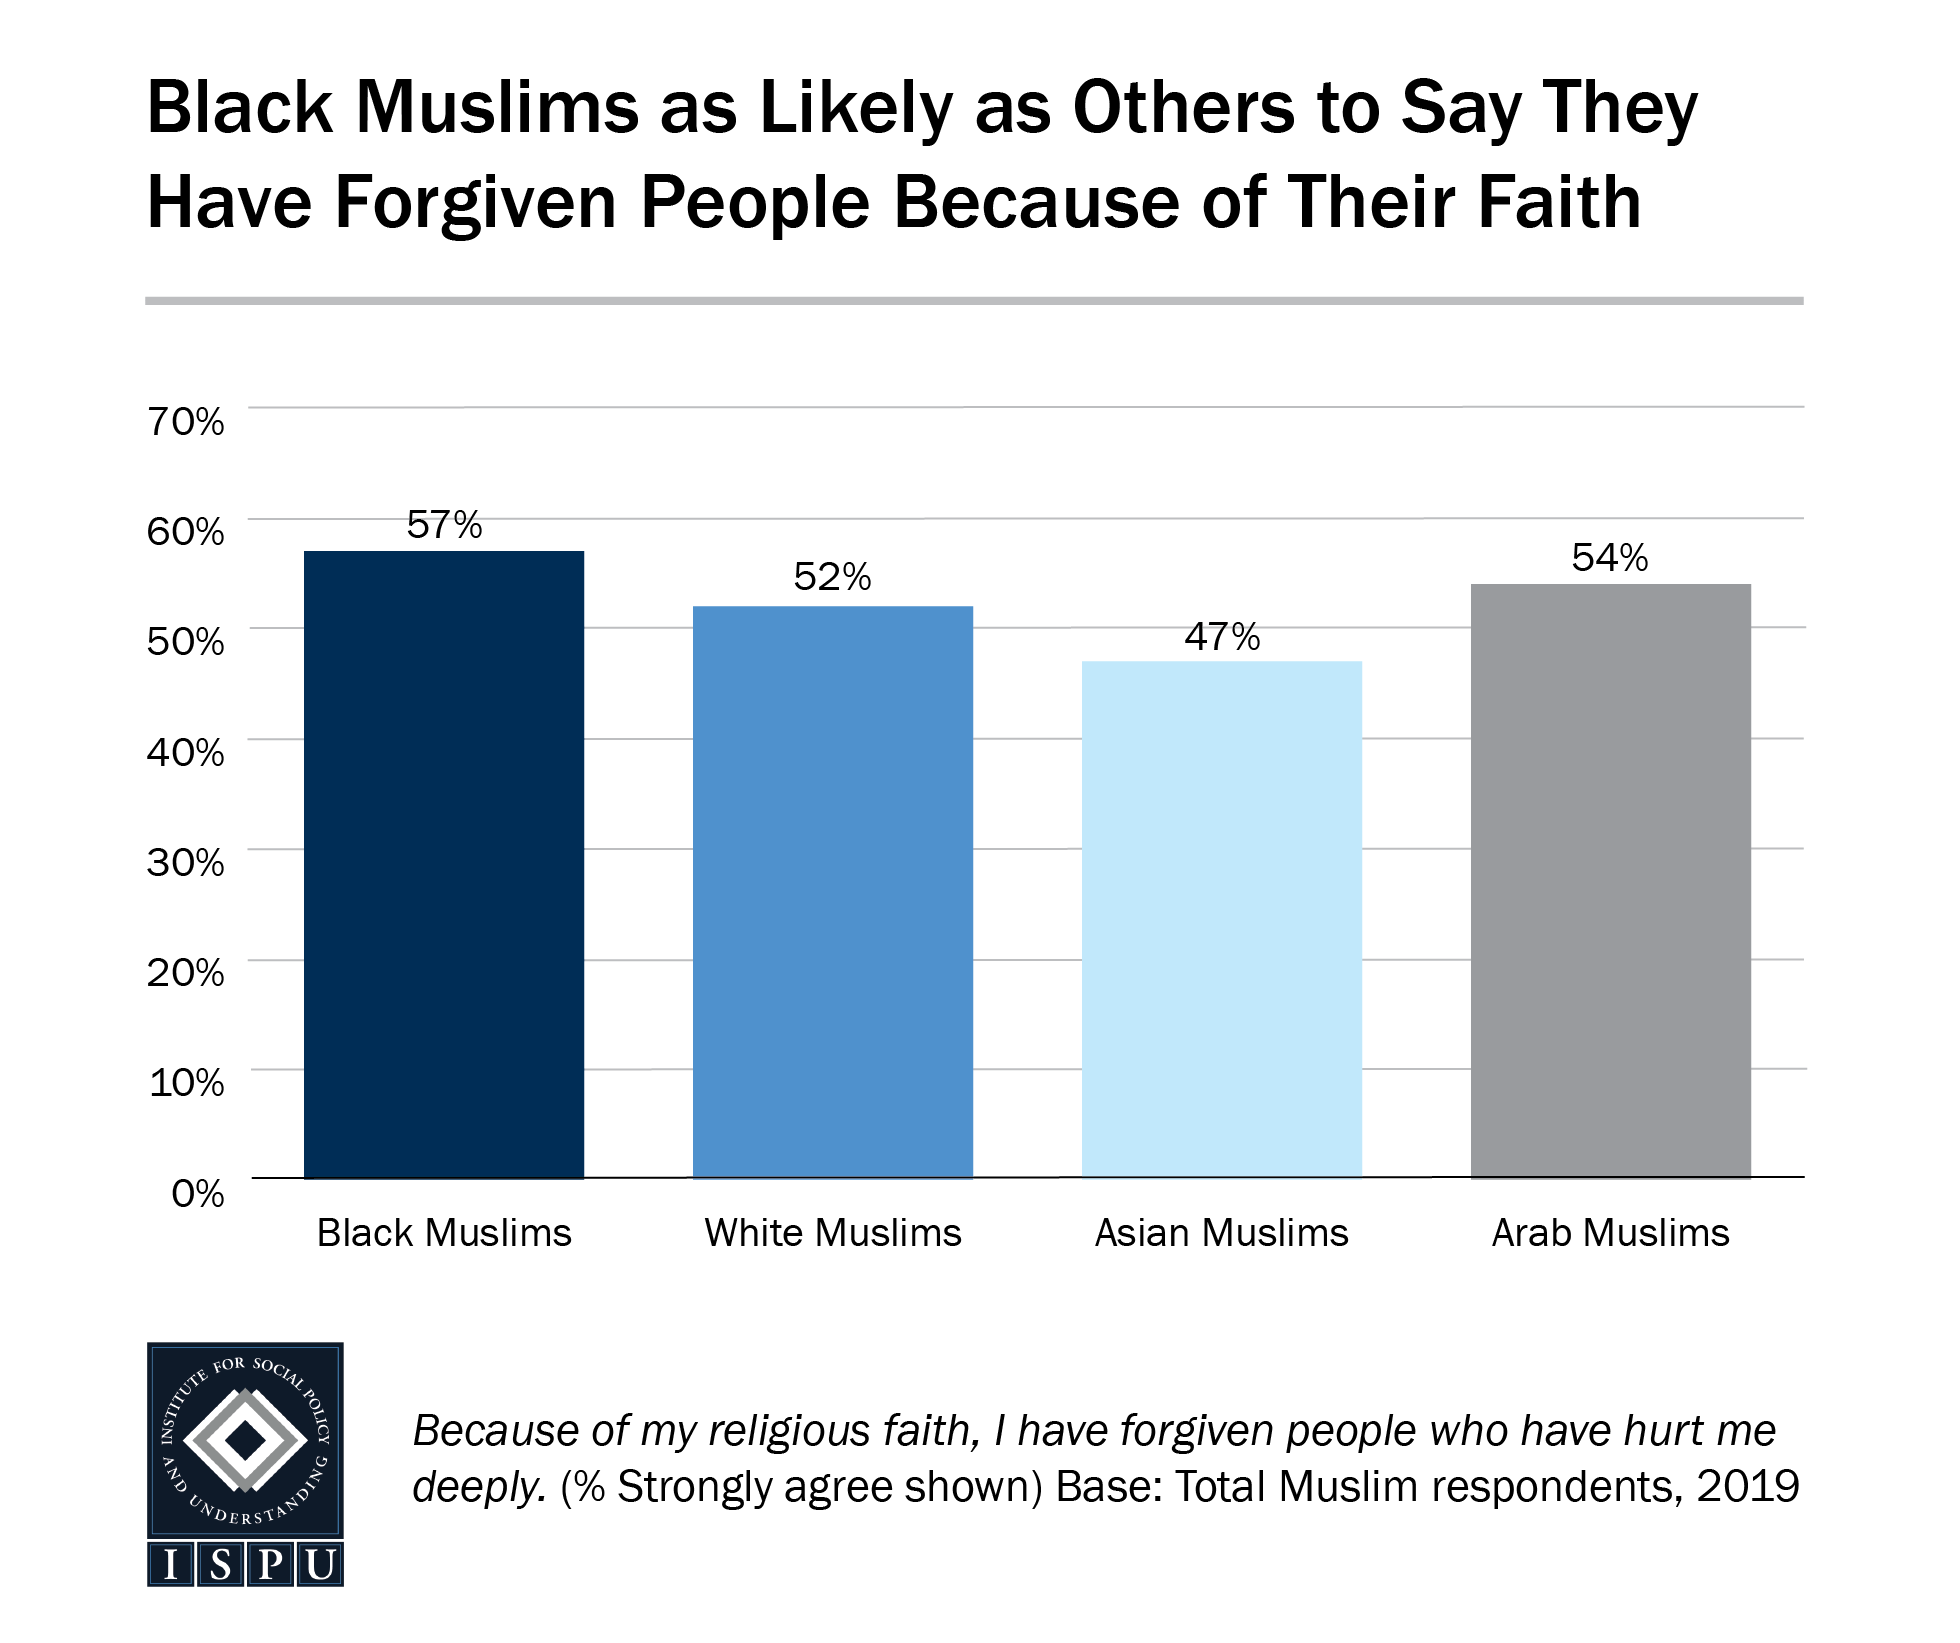 A bar graph showing that Black Muslims are as likely as other Muslims to say they have forgiven people because of their faith